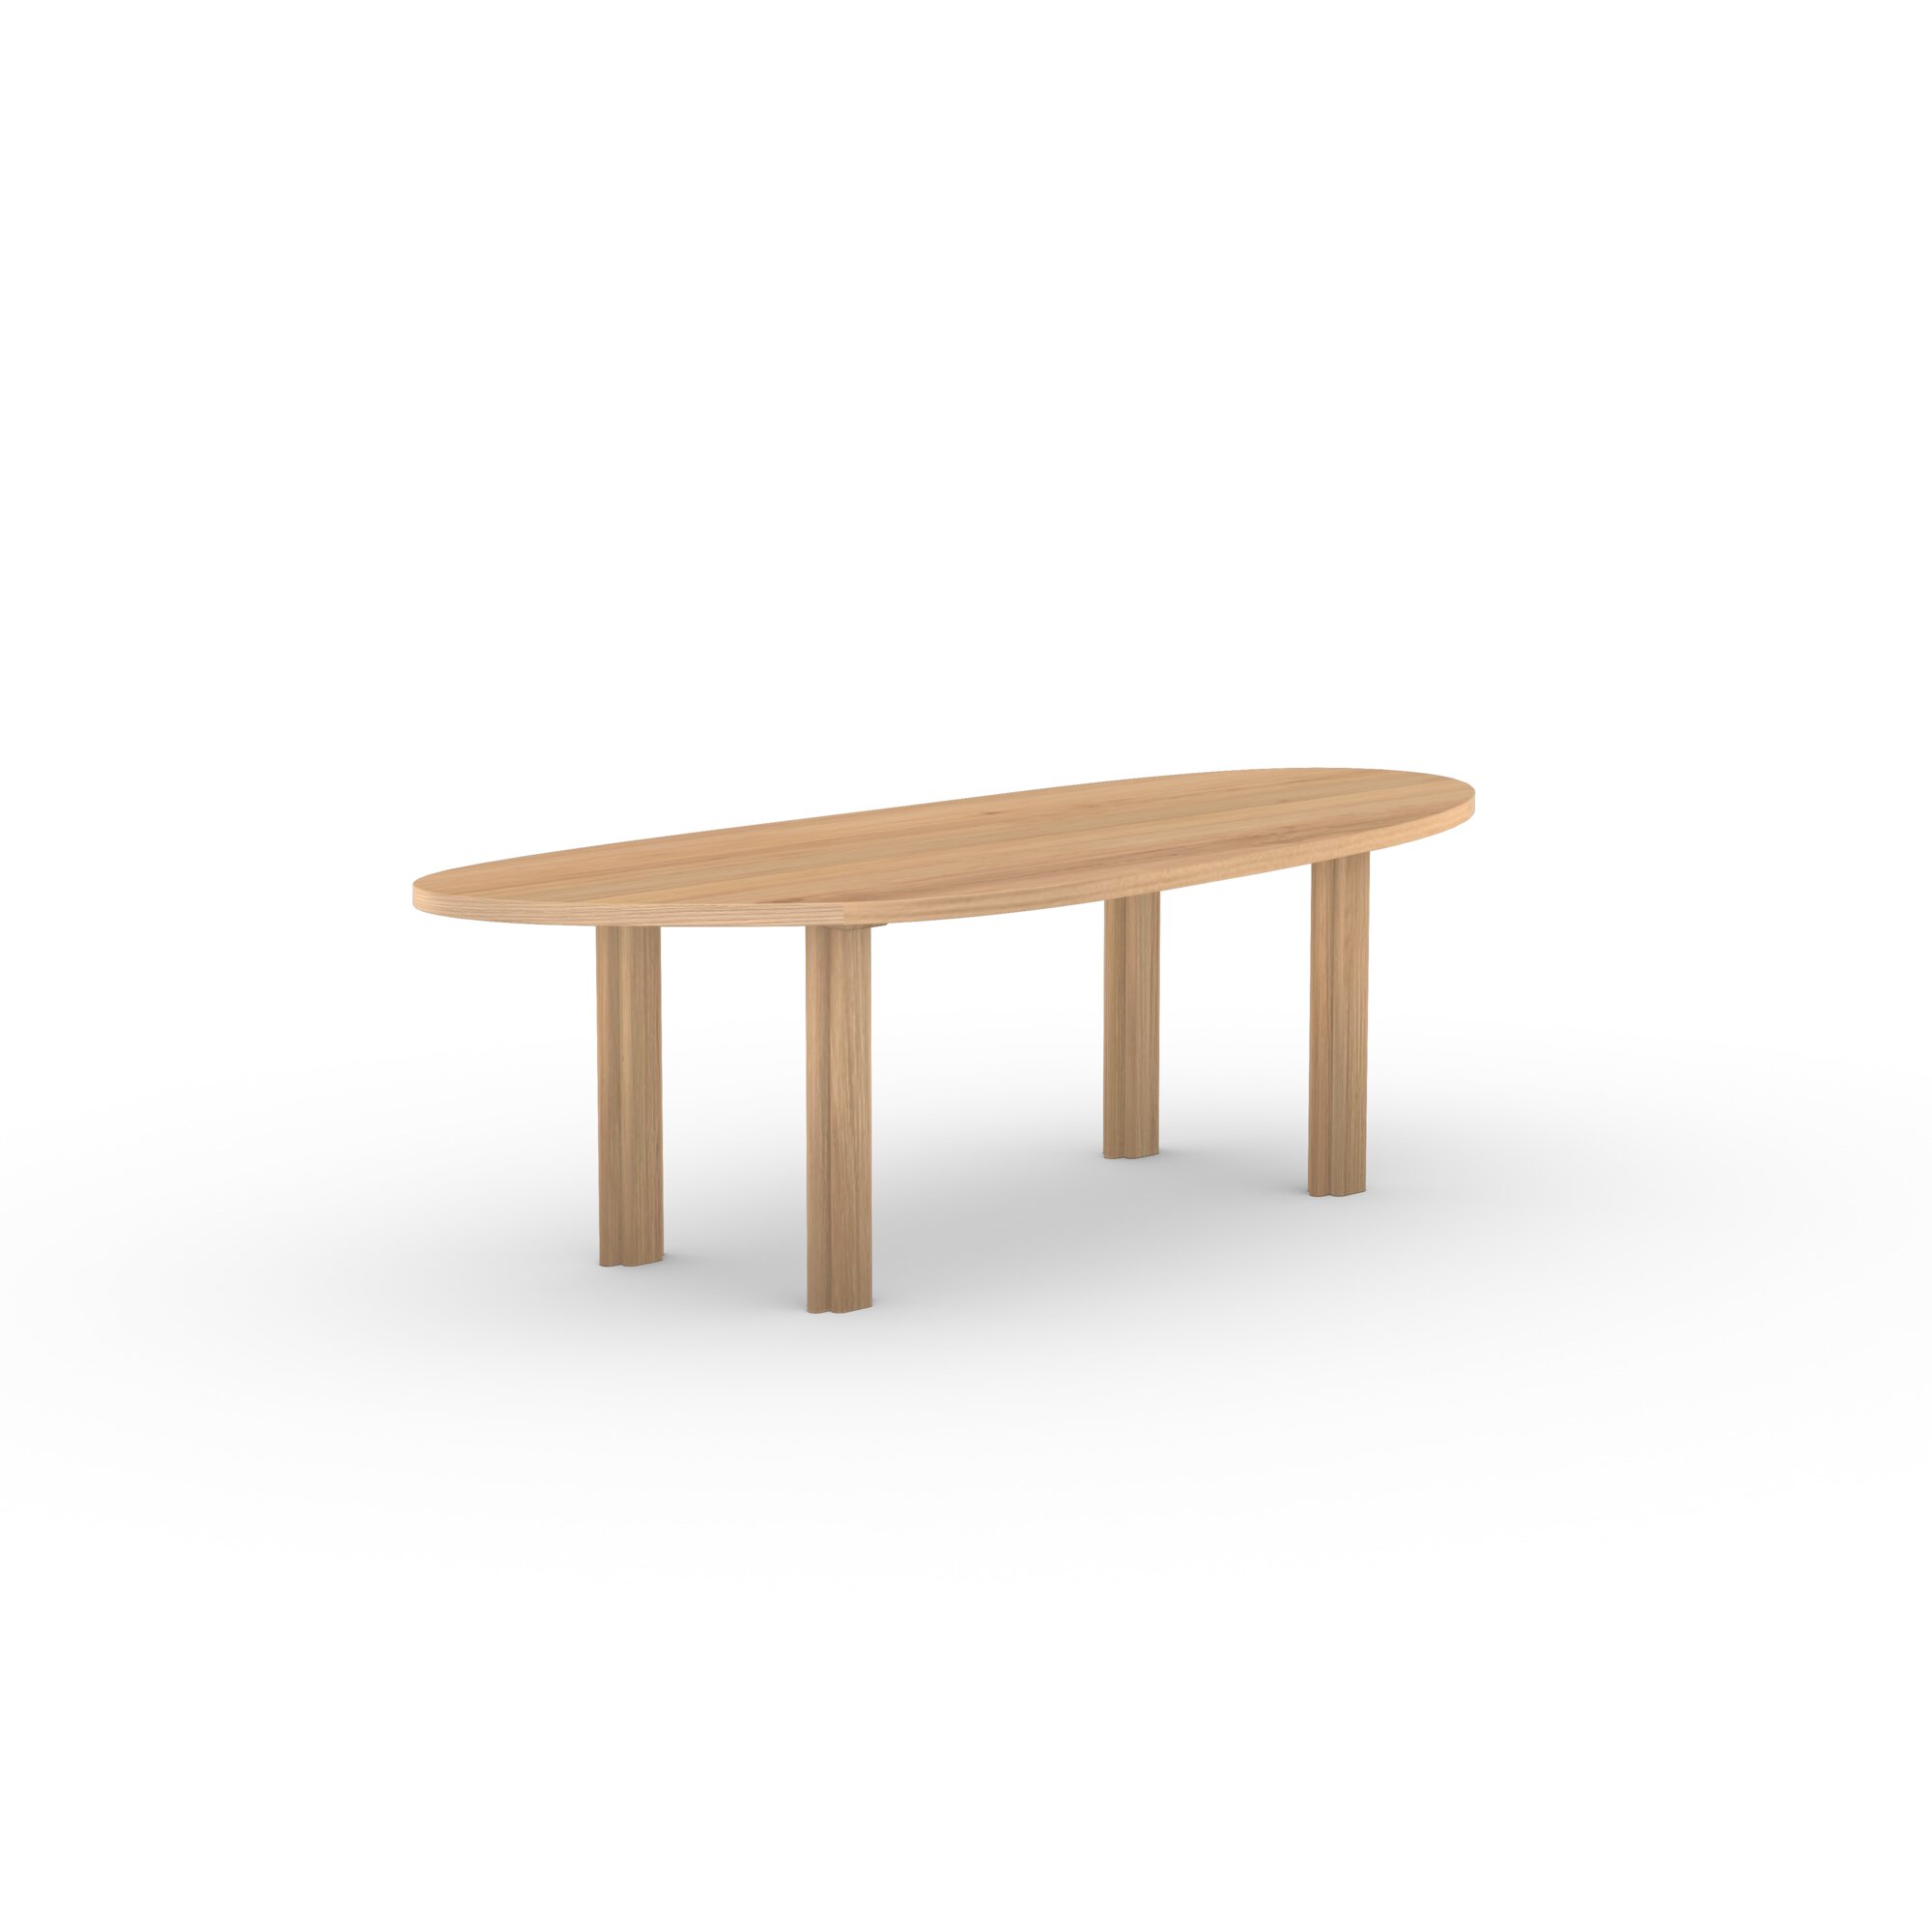 Blob Design dining table | Paste Dining Table Oak natural lacquer | Oak natural lacquer  | Studio HENK| 